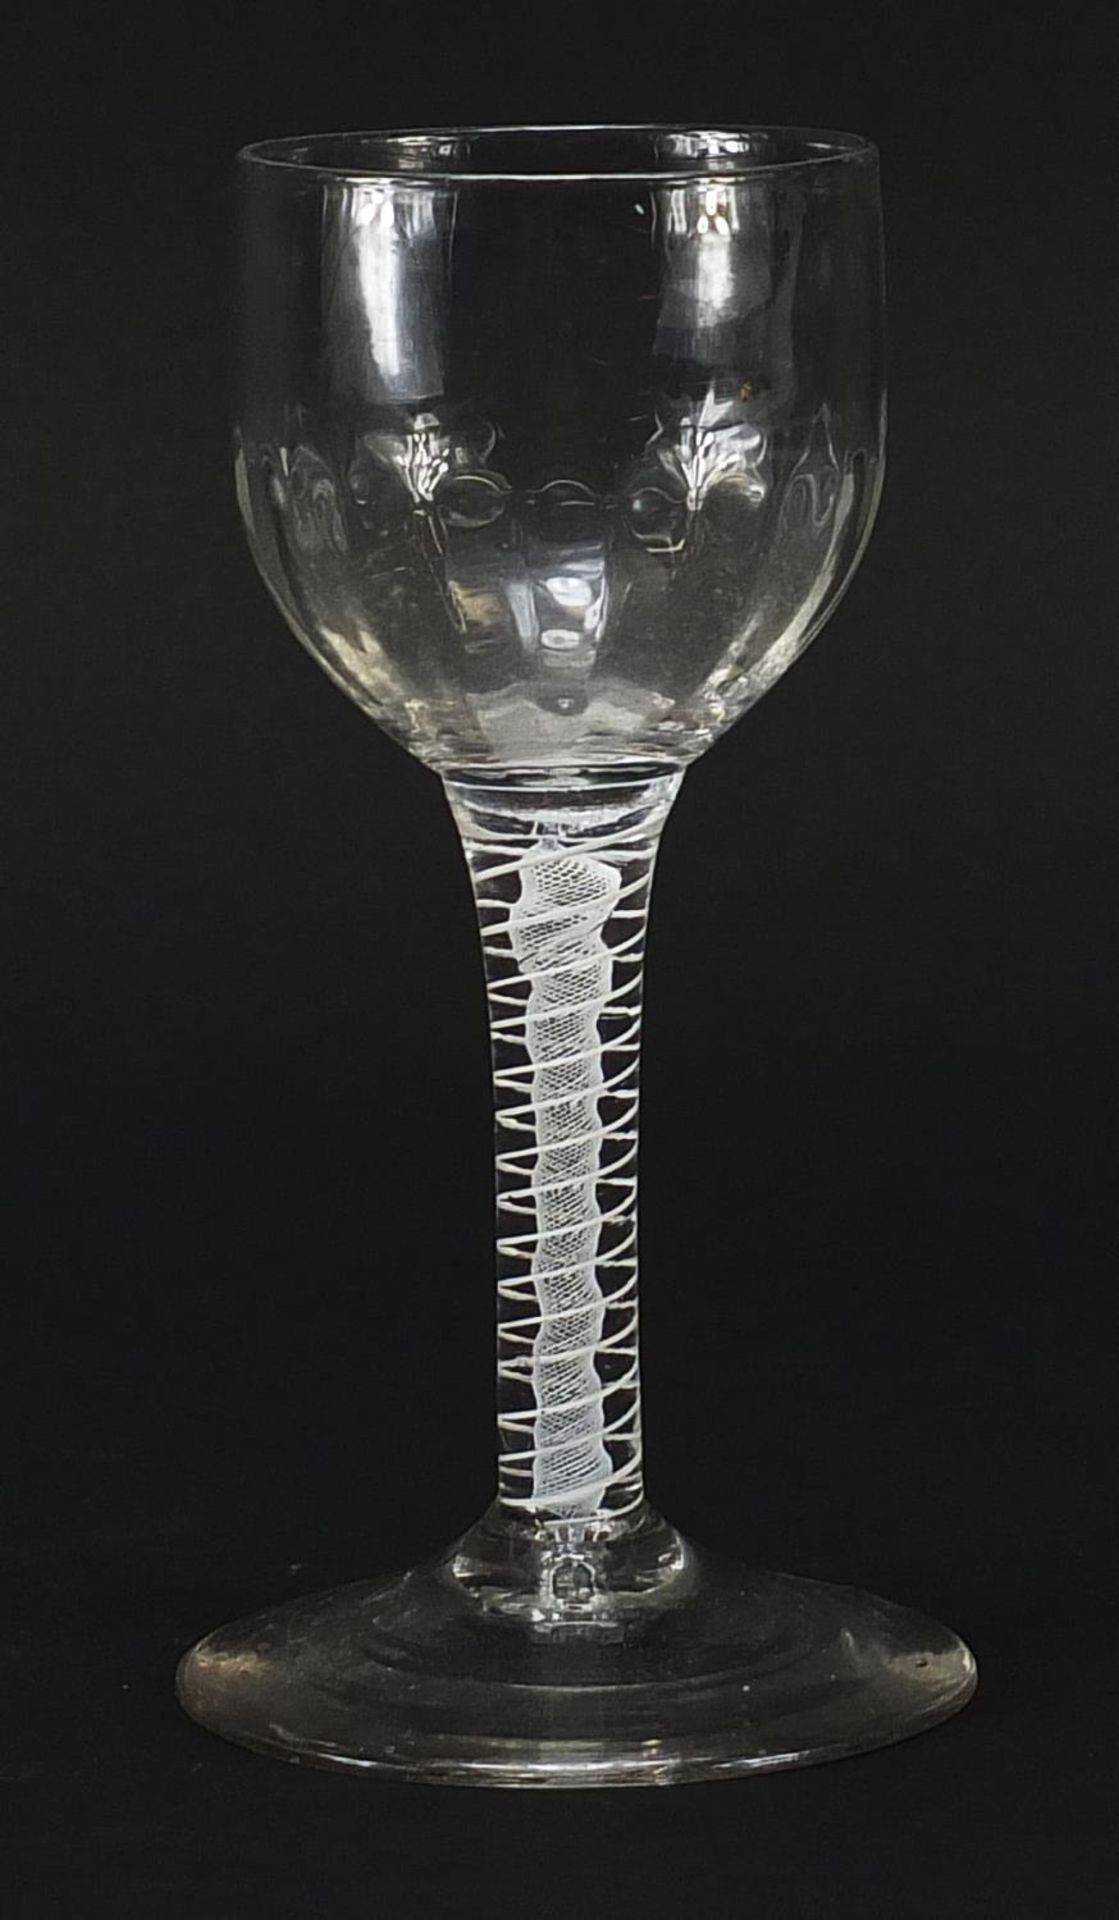 18th century wine glass with opaque twist stem and facetted bowl, 15cm high - Image 2 of 3